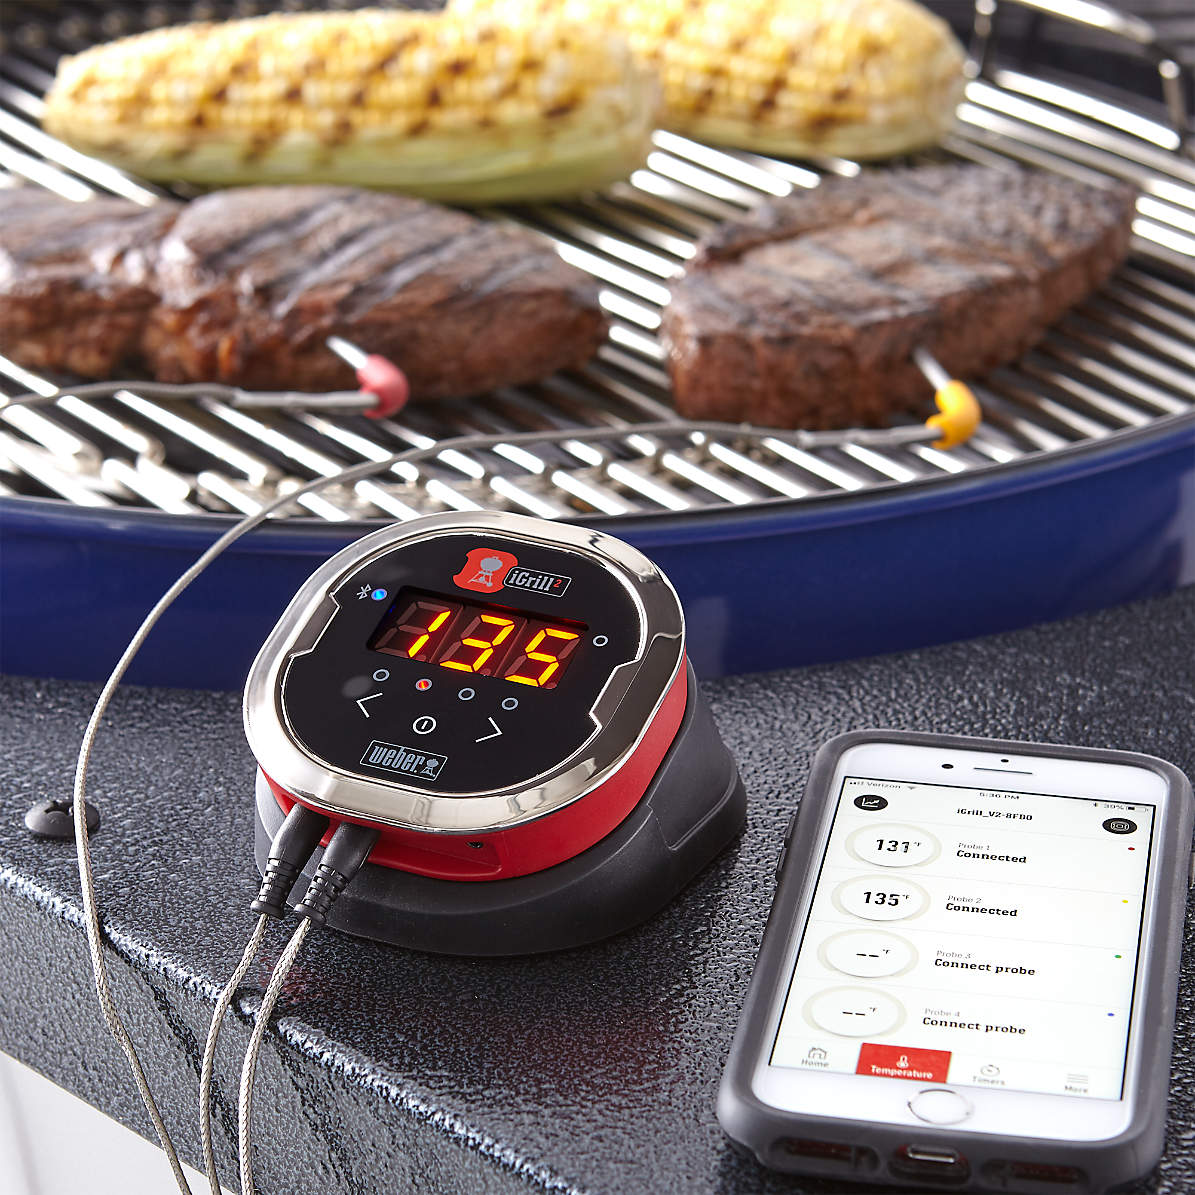 Weber iGrill 2 Thermometer + Reviews | Crate Barrel